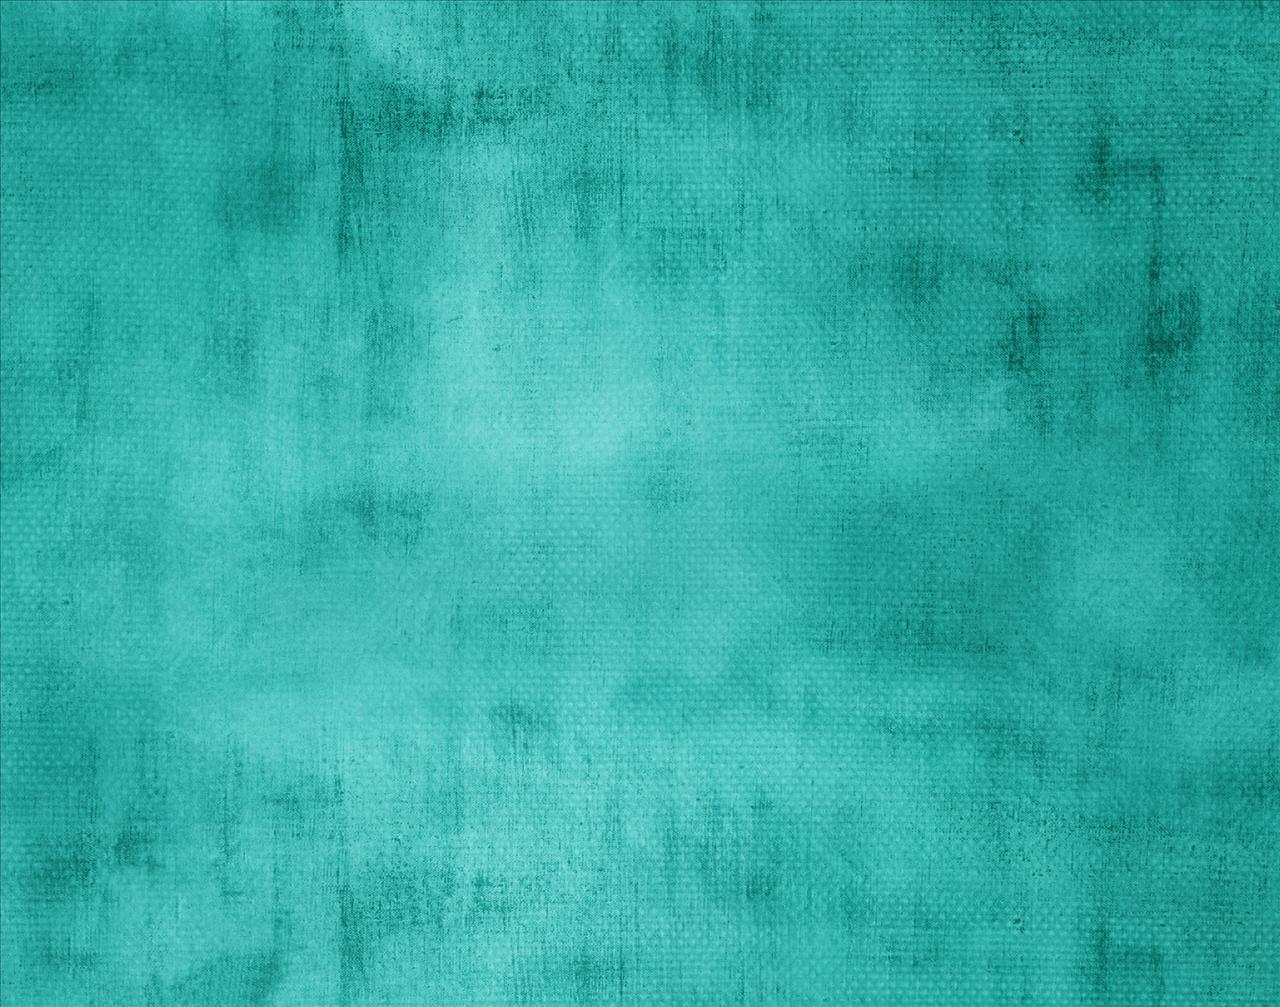 Turquoise Three Abstract